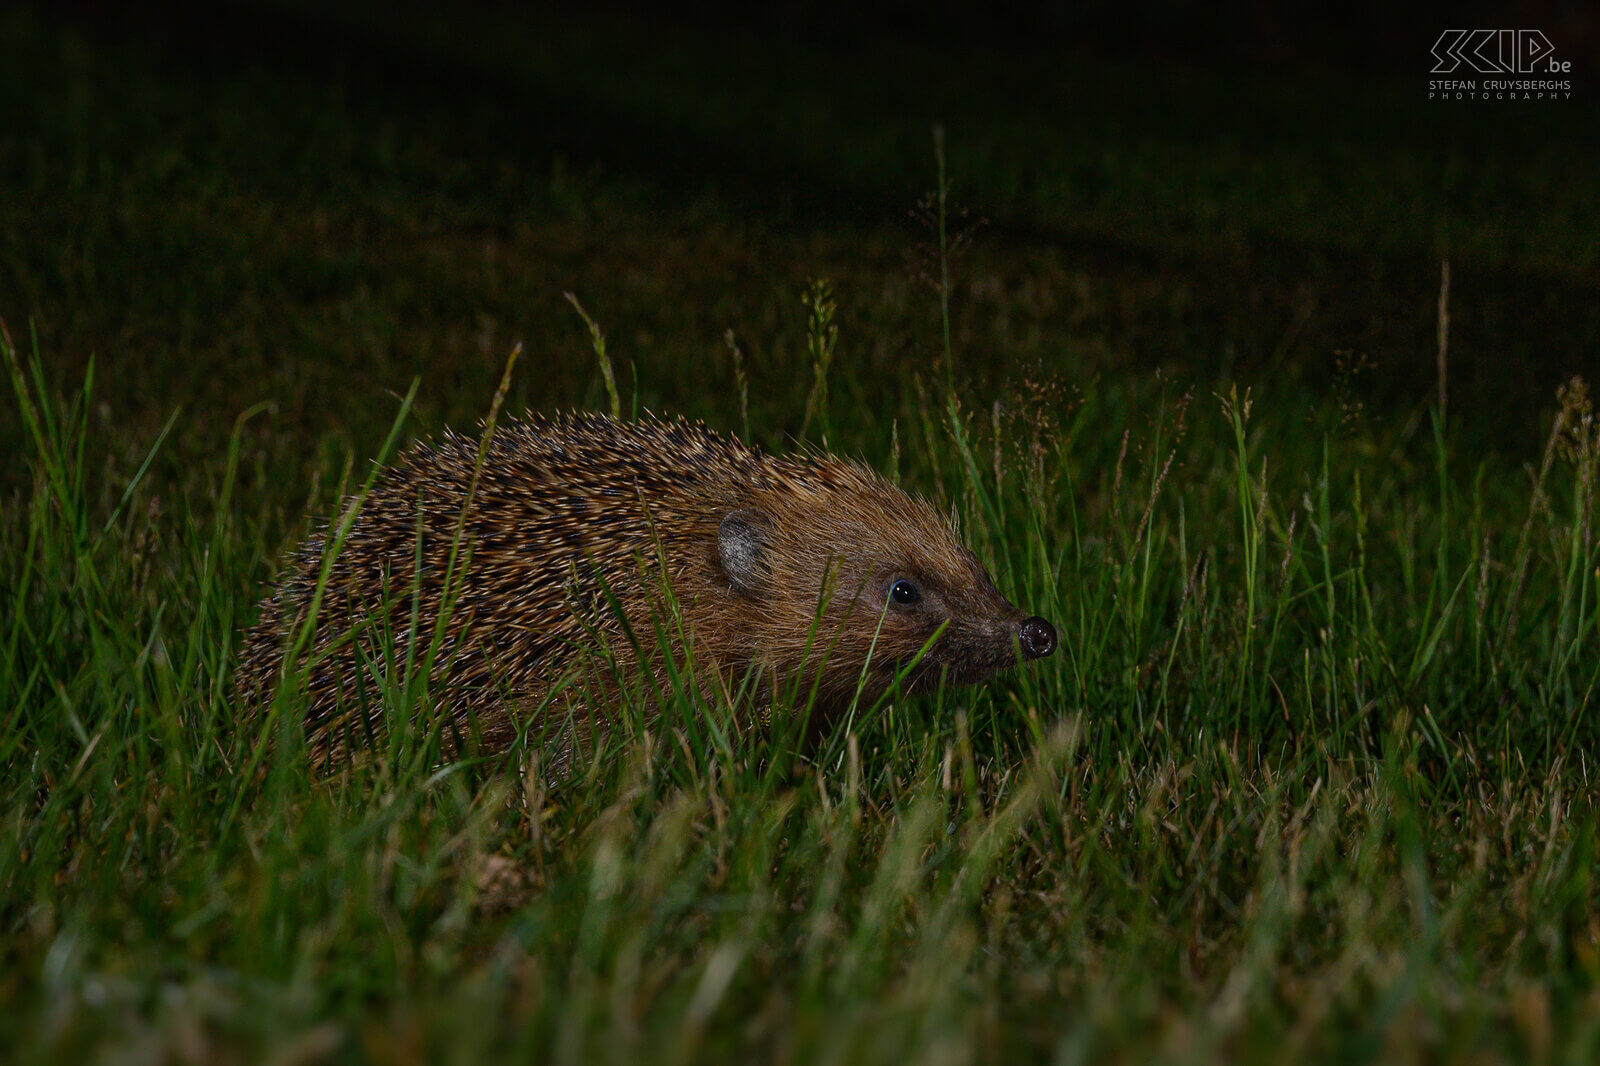 Nocturnal animals in our garden - Hedgehog The hedgehog is a nocturnal animal and visits our garden almost daily. It is an insectivore with a length of 20-30cm and its spines can be up to 2.5cm long. They mainly eat snails, earthworms, beetles, caterpillars, earwigs,… but amphibians and small rodents are also sometimes on the menu. They live solitary and hibernate from October-November. Stefan Cruysberghs